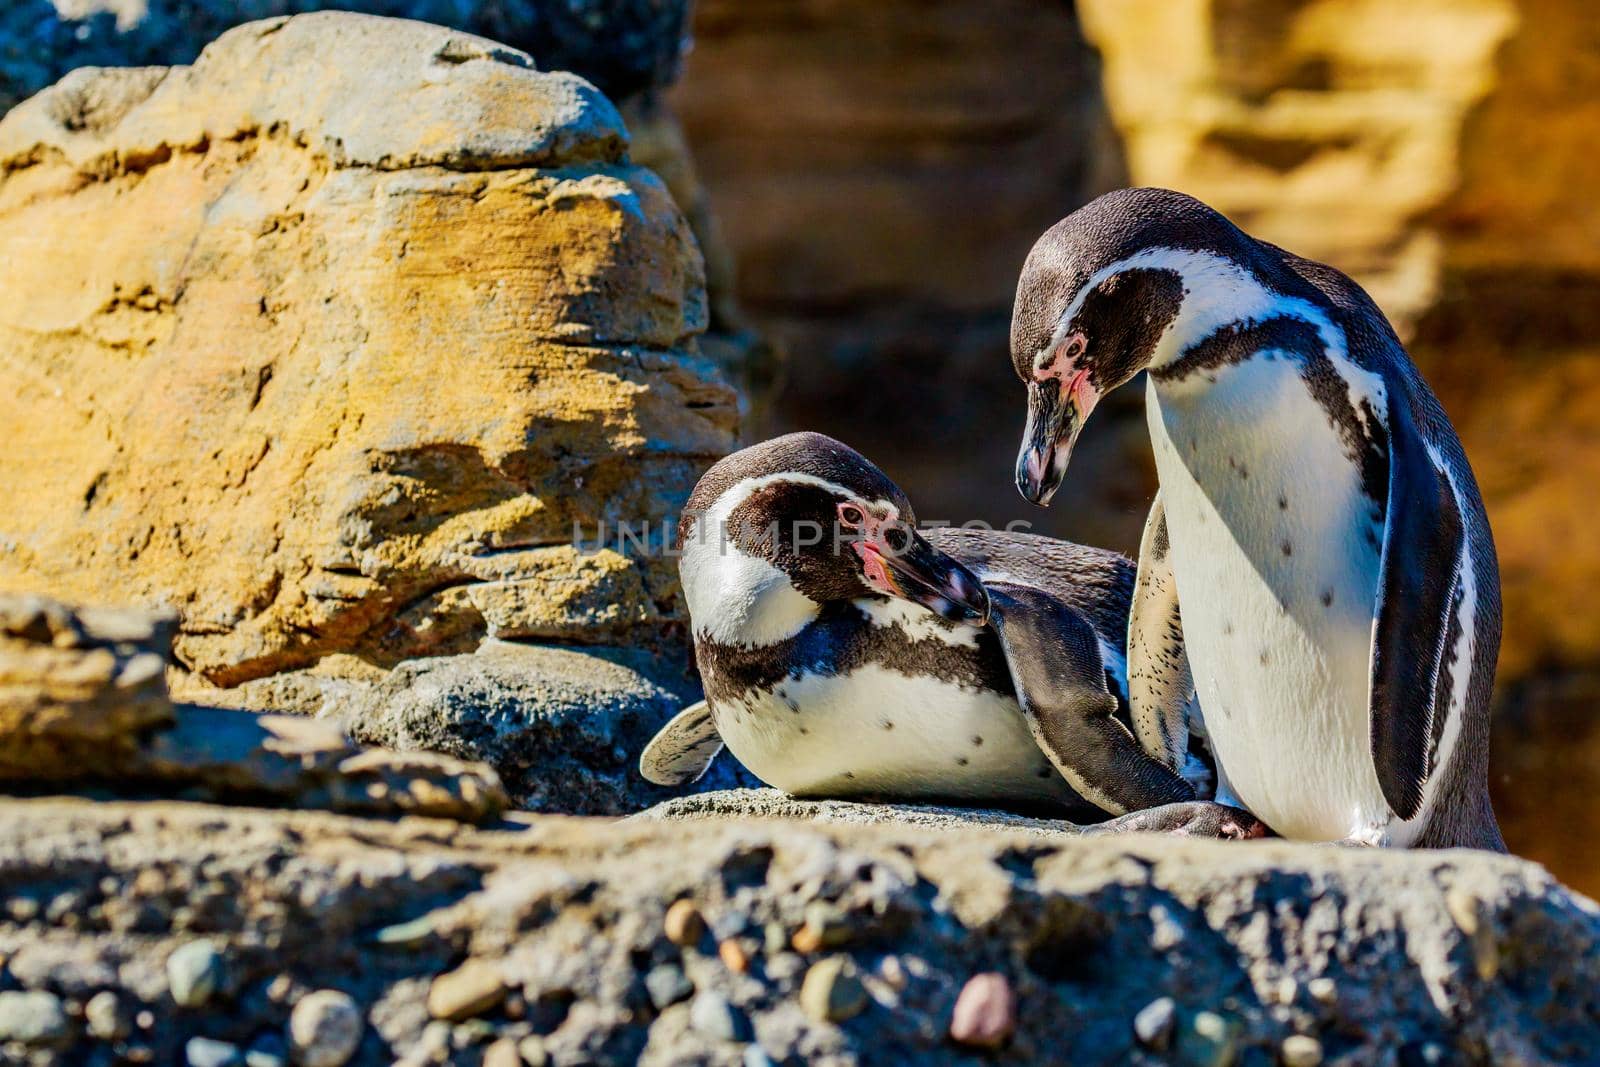 Two Humboldt Penguins accompany each other on the rock.